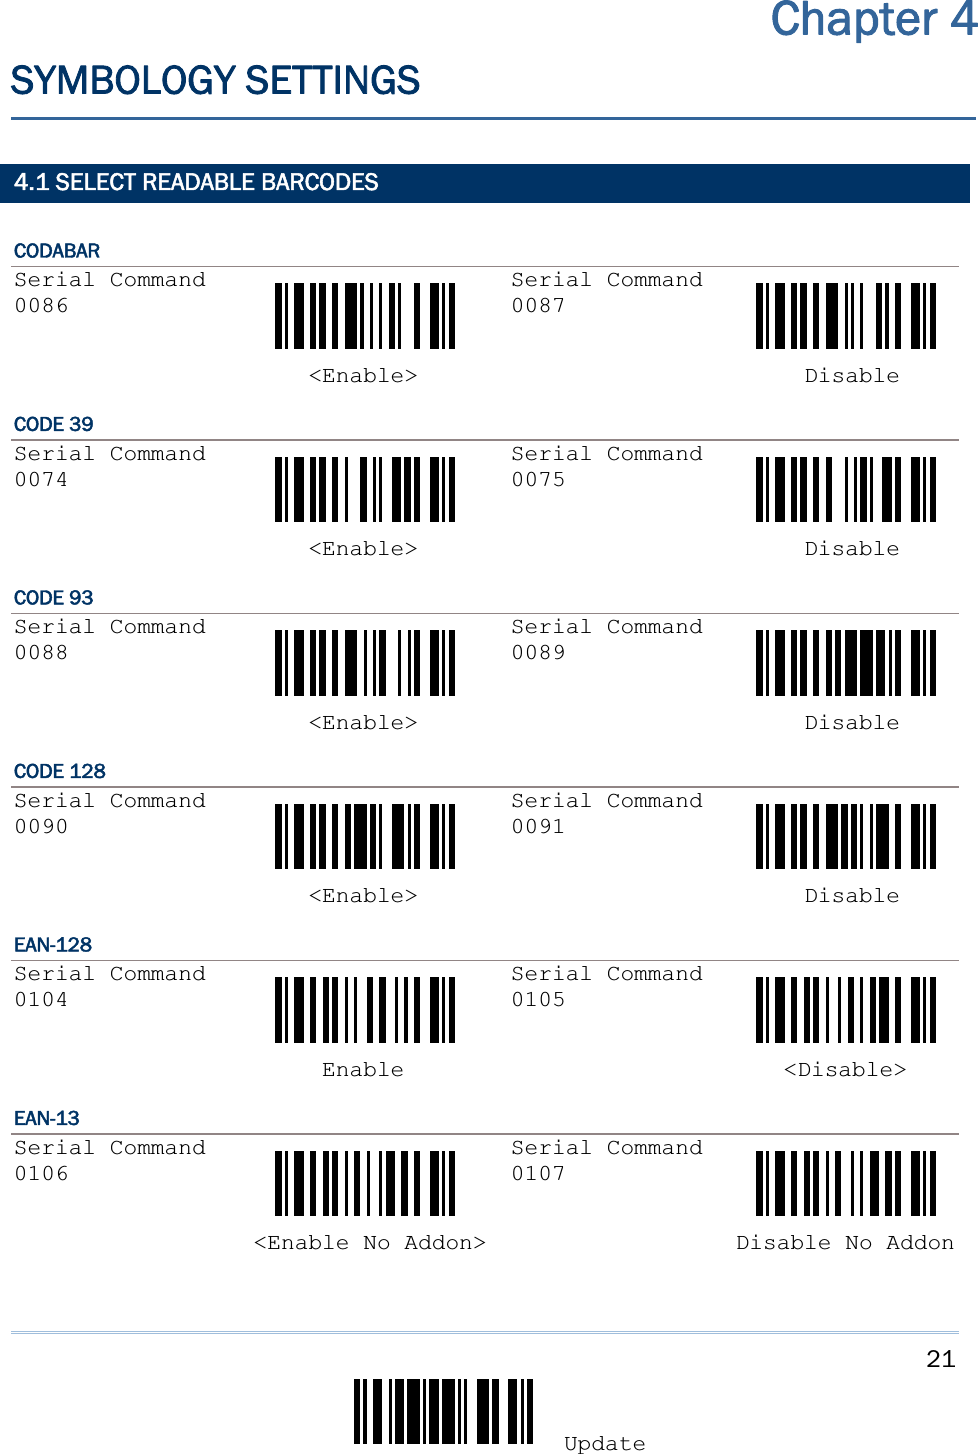 21Update4.1 SELECT READABLE BARCODES CODABARSerial Command0086Serial Command 0087       &lt;Enable&gt;     Disable CODE 39 Serial Command0074Serial Command 0075       &lt;Enable&gt;     Disable CODE 93 Serial Command0088Serial Command 0089       &lt;Enable&gt;     Disable CODE 128 Serial Command0090Serial Command 0091       &lt;Enable&gt;     Disable EAN-128Serial Command0104Serial Command 0105        Enable    &lt;Disable&gt; EAN-13Serial Command0106Serial Command 0107   &lt;Enable No Addon&gt;    Disable No AddonChapter 4SYMBOLOGY SETTINGS 